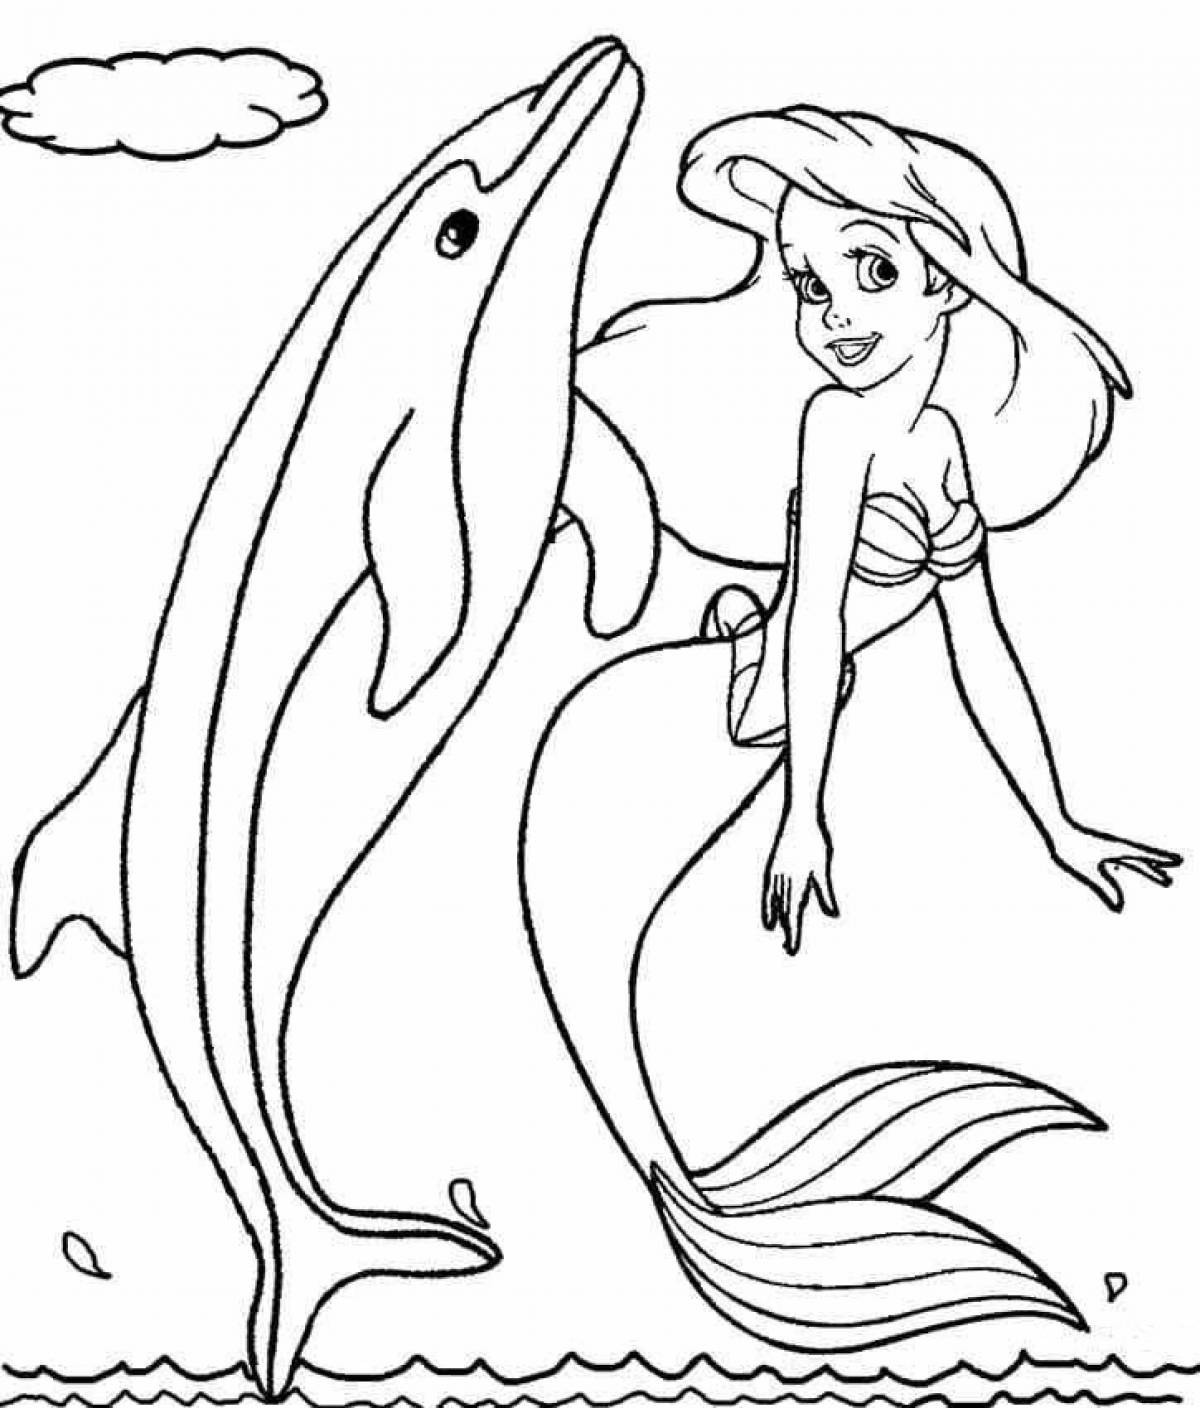 Playful little mermaid coloring book for 3-4 year olds